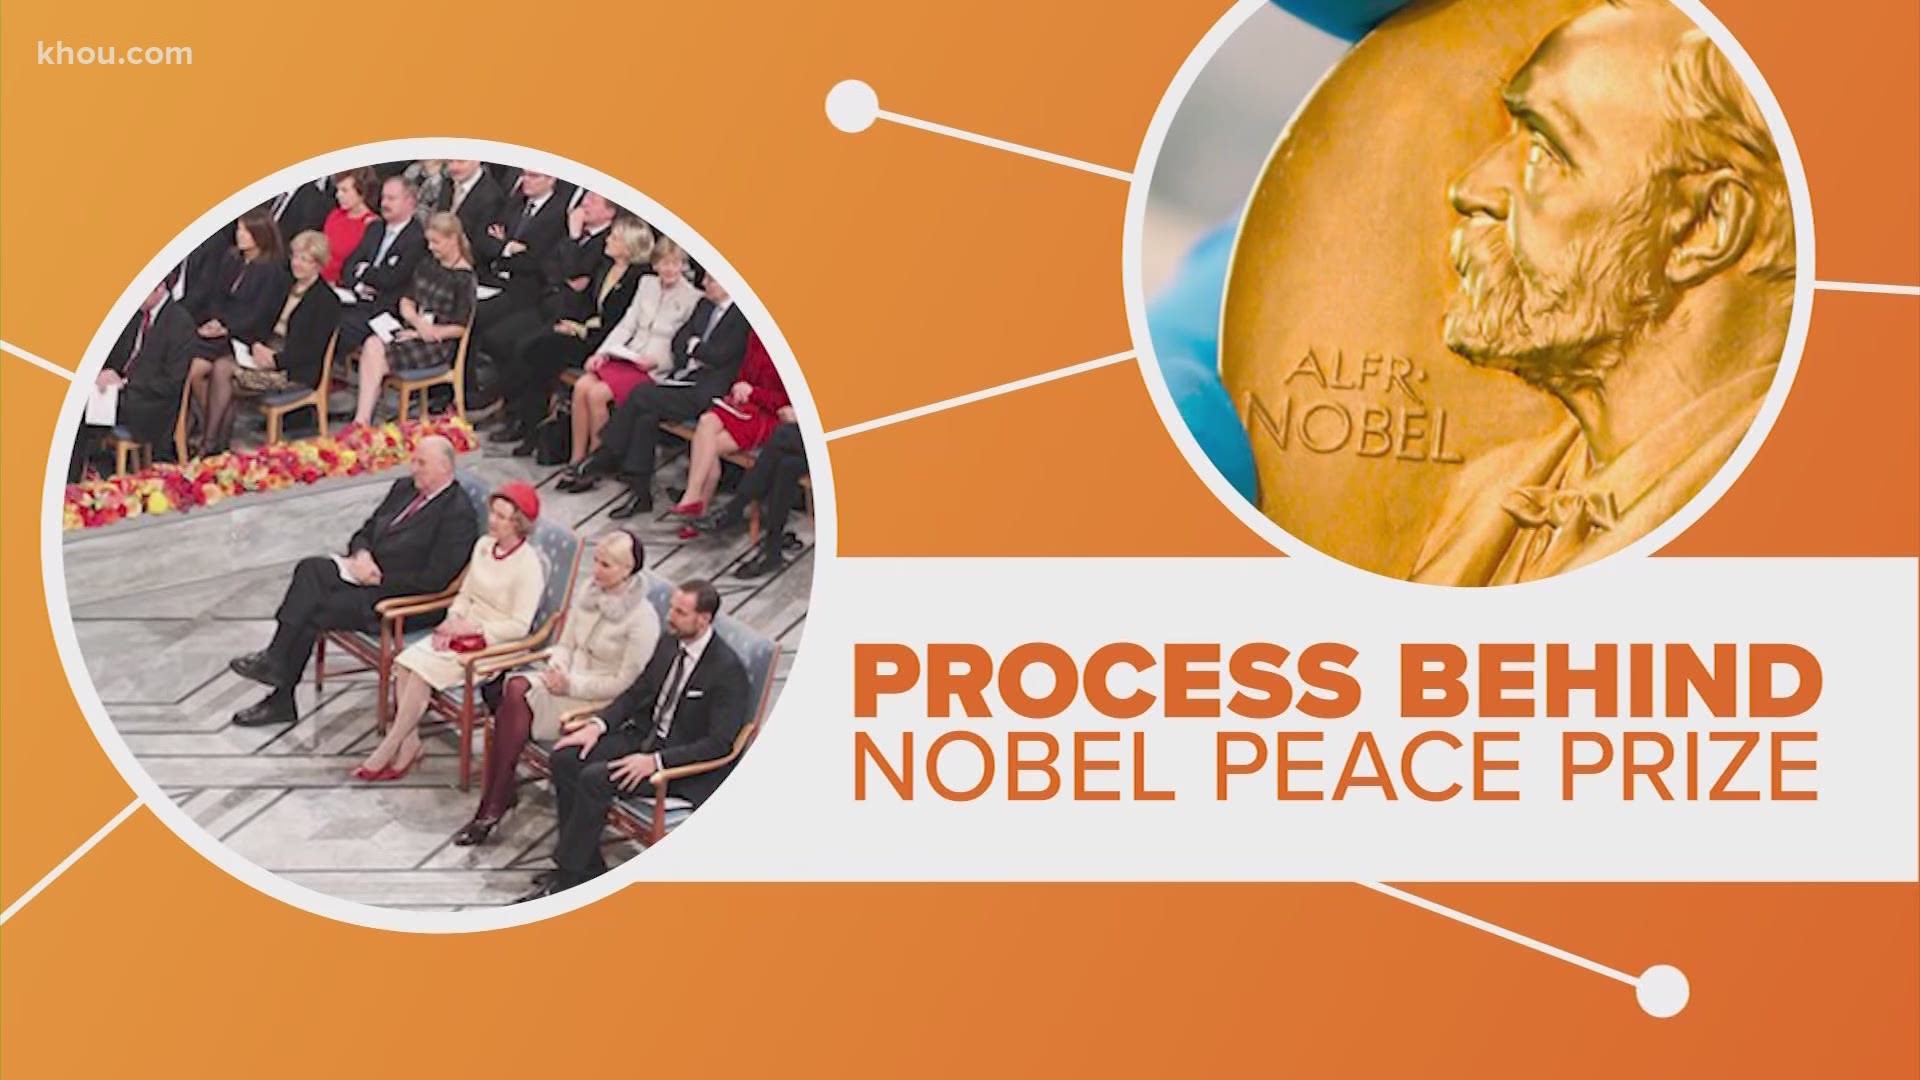 The Nobel Peace Prize is world-renowned but many don’t know how and why the winners are chosen. Let’s connect the dots.